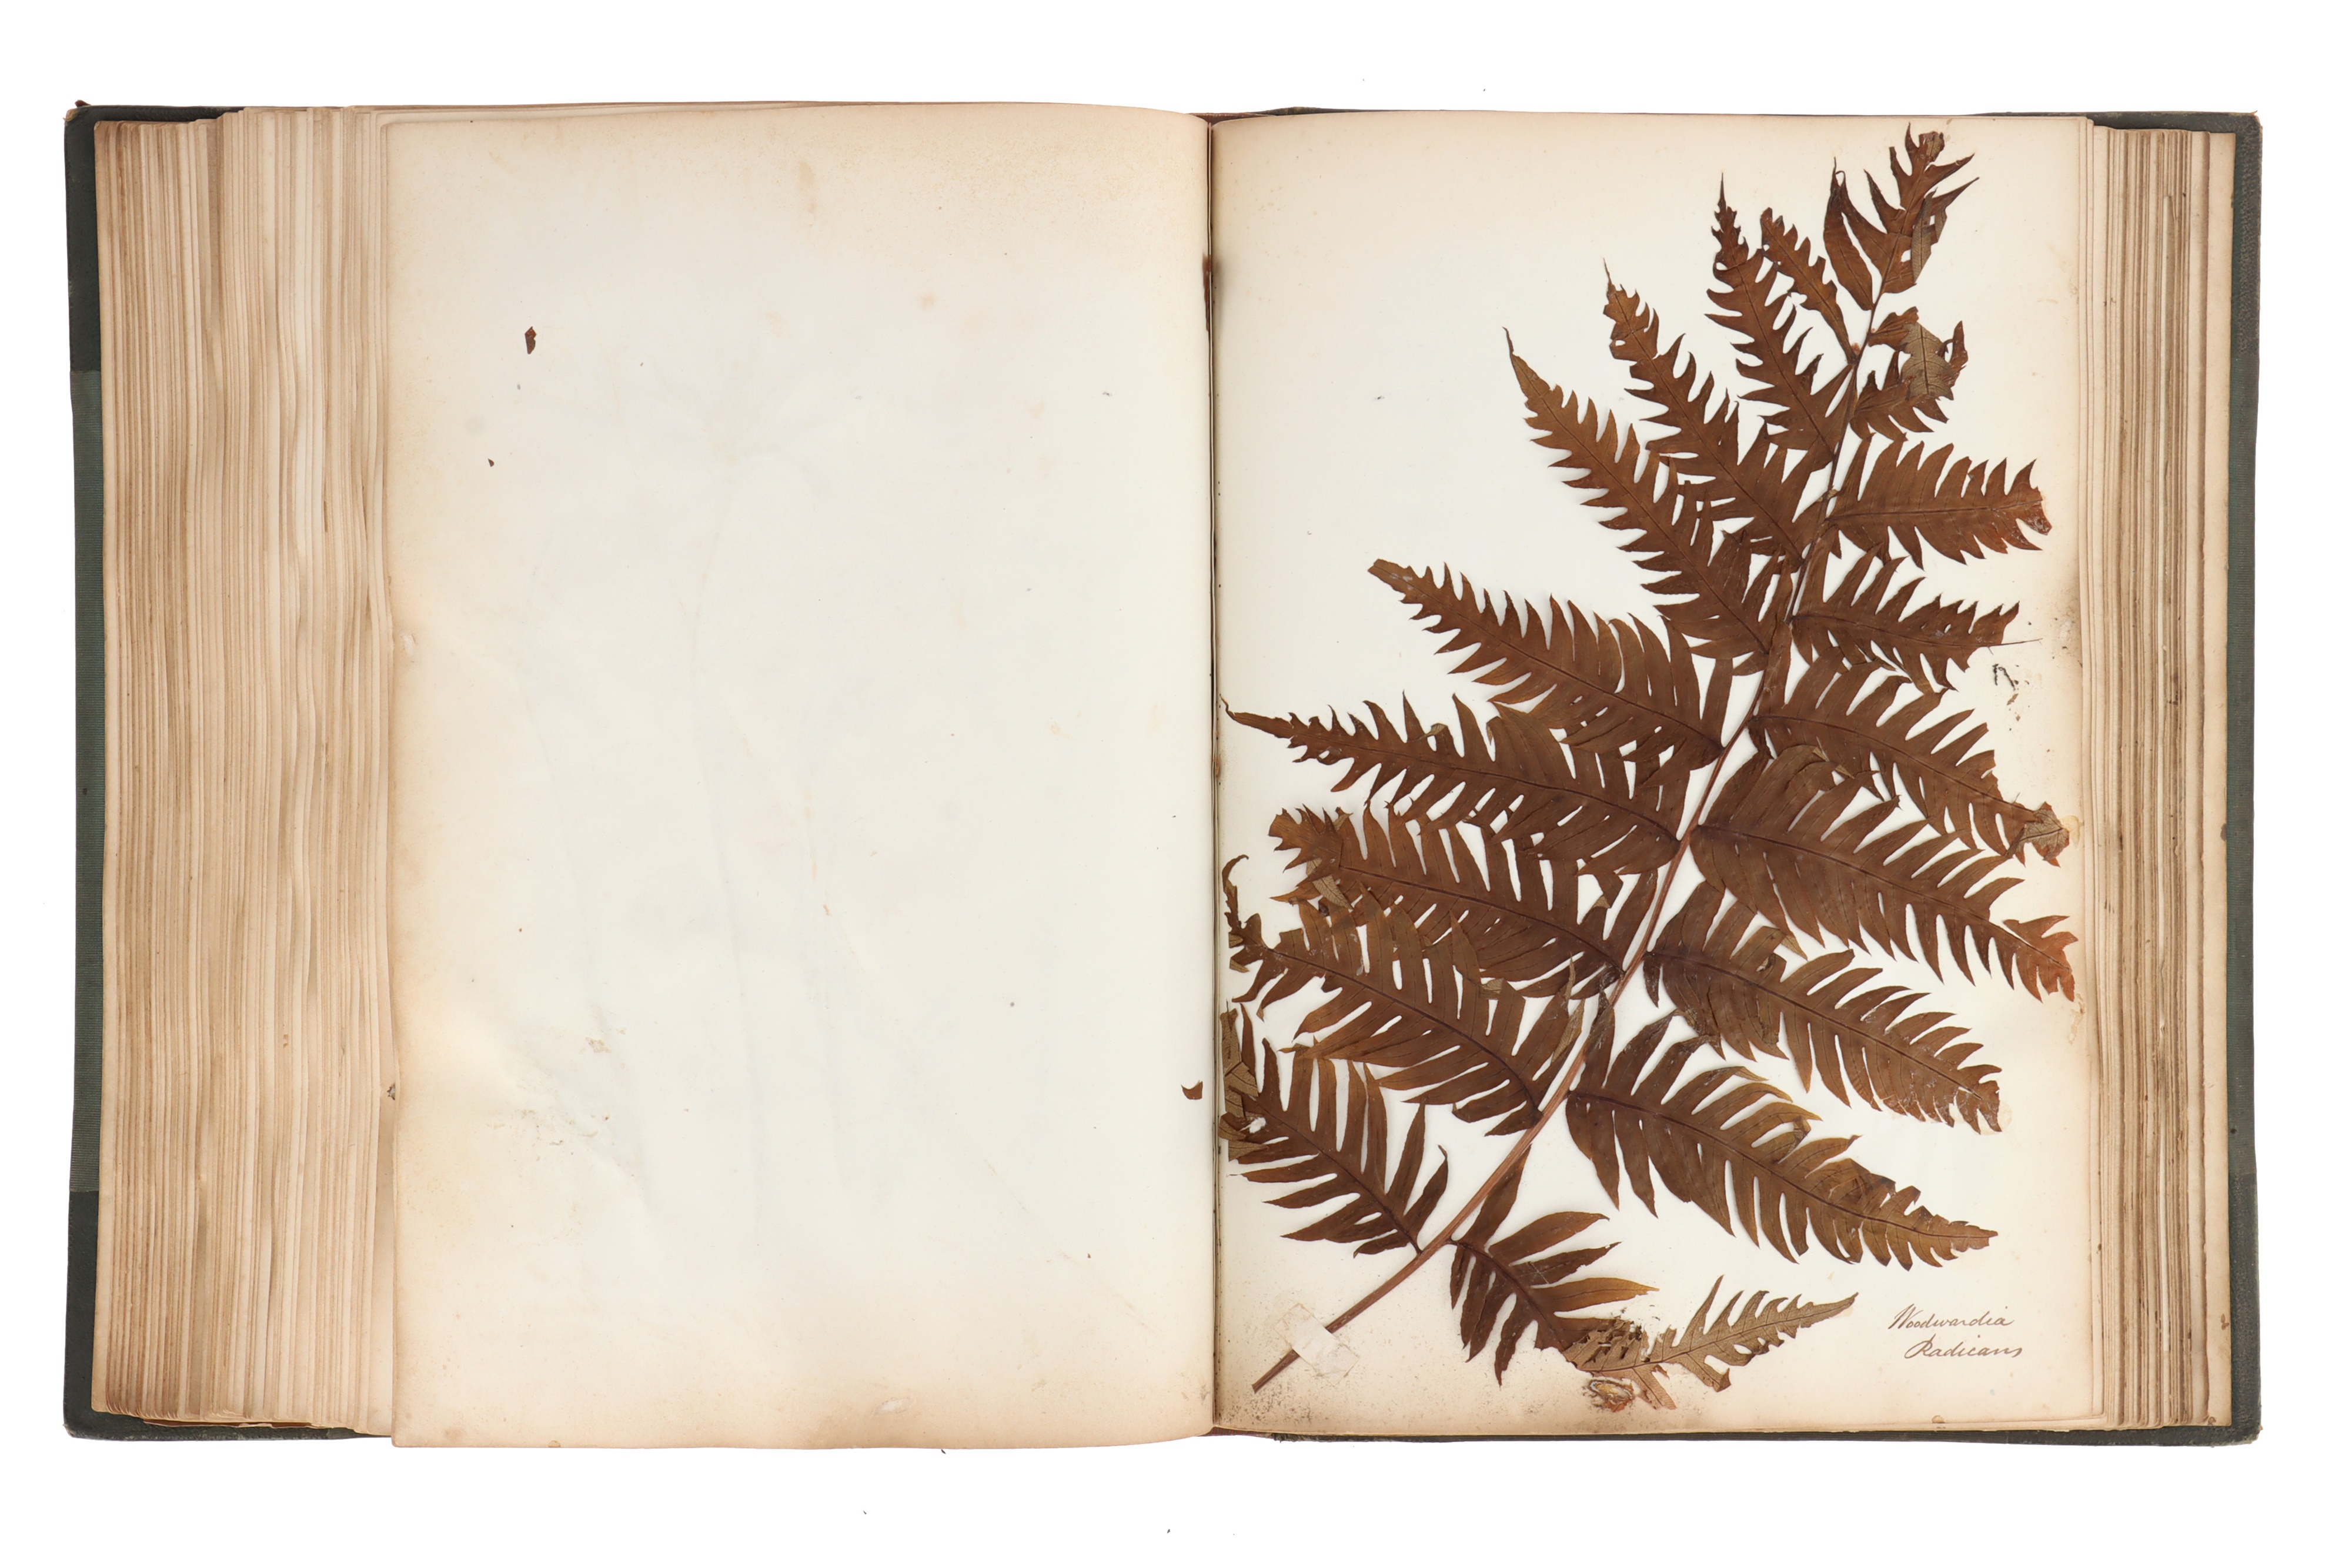 A Large & Well Annotated Mid 19th Century Album of Pressed Ferns, - Image 7 of 11